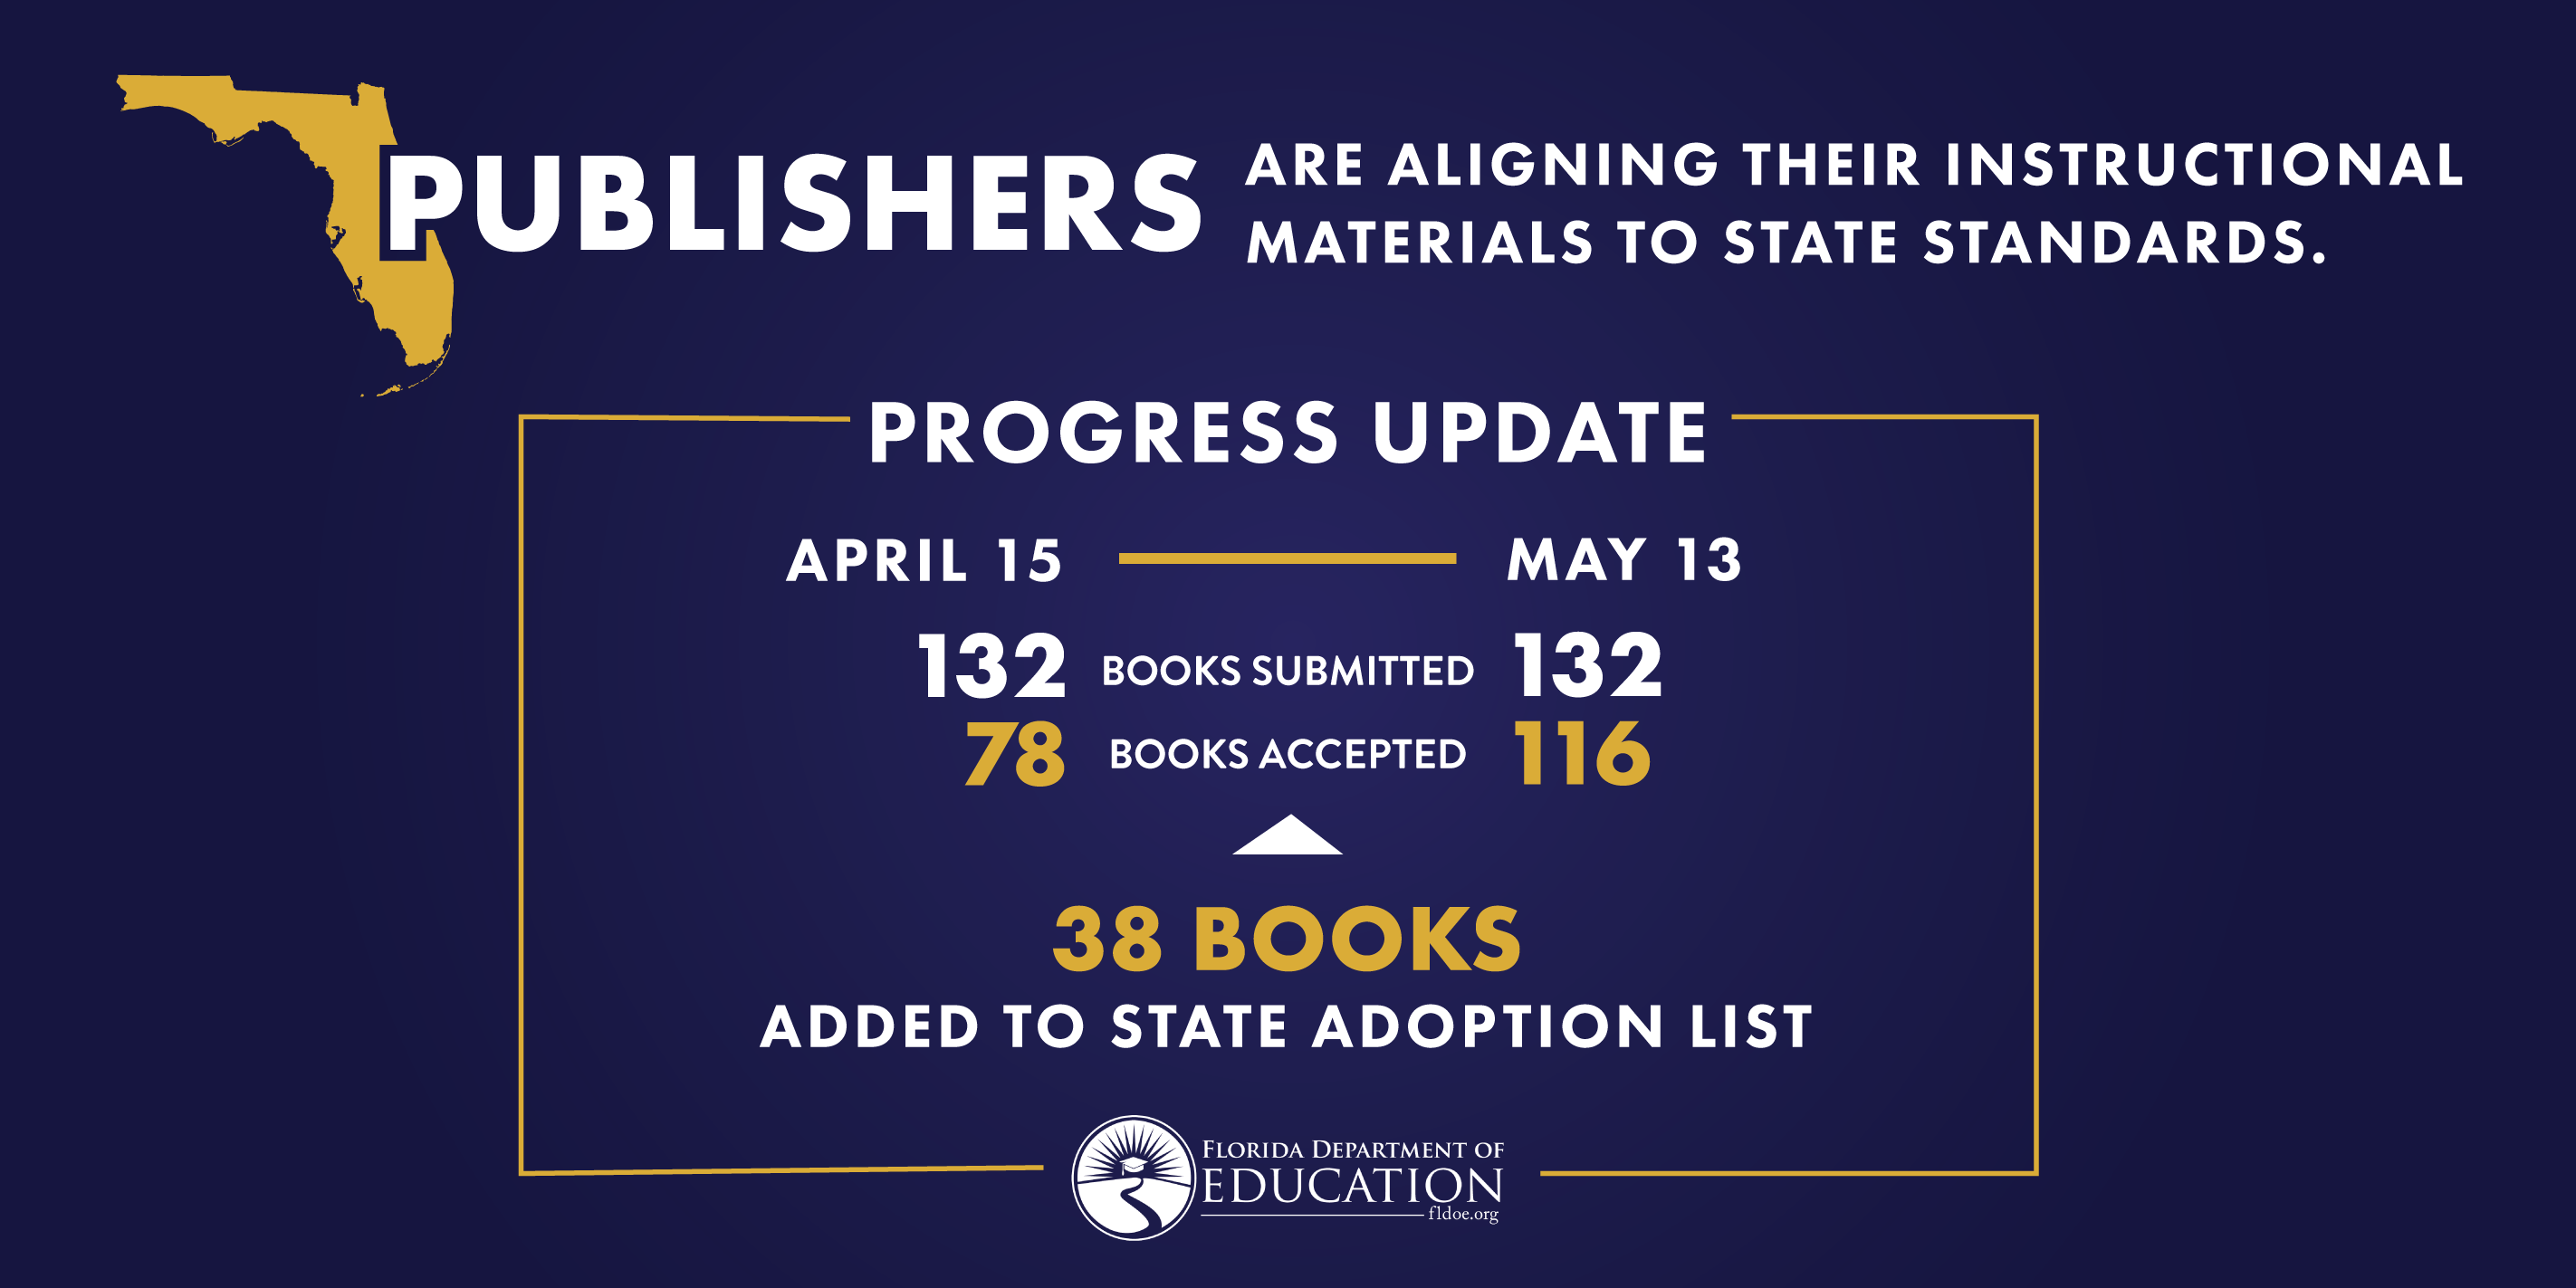 Publishers are aligning their instructional materials to state standards - Progress update: April 15 - 132 books submitted 78 books accepted. May 13 - 132 books submitted 116 books accepted. 38 books added to the state adoption list. 